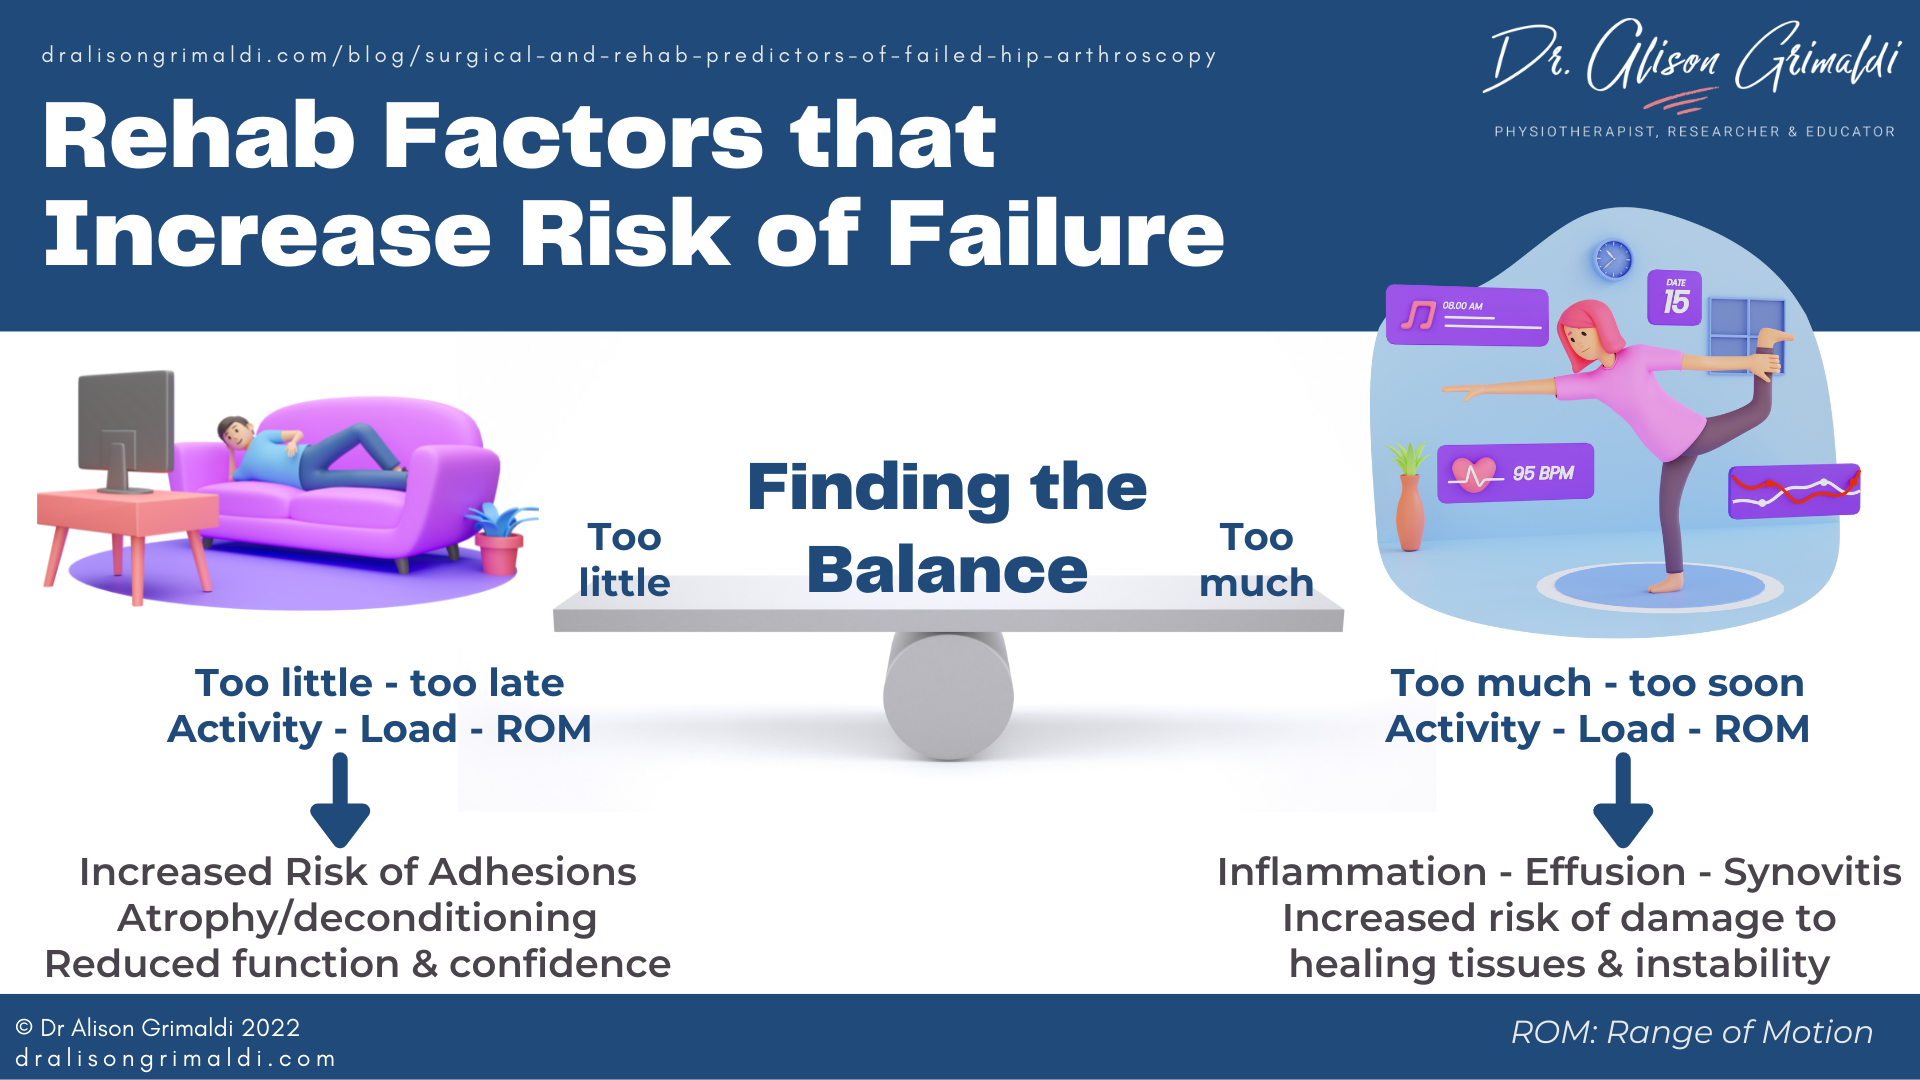 infographic of Rehab factors that increase risk of failure after hip arthroscopy